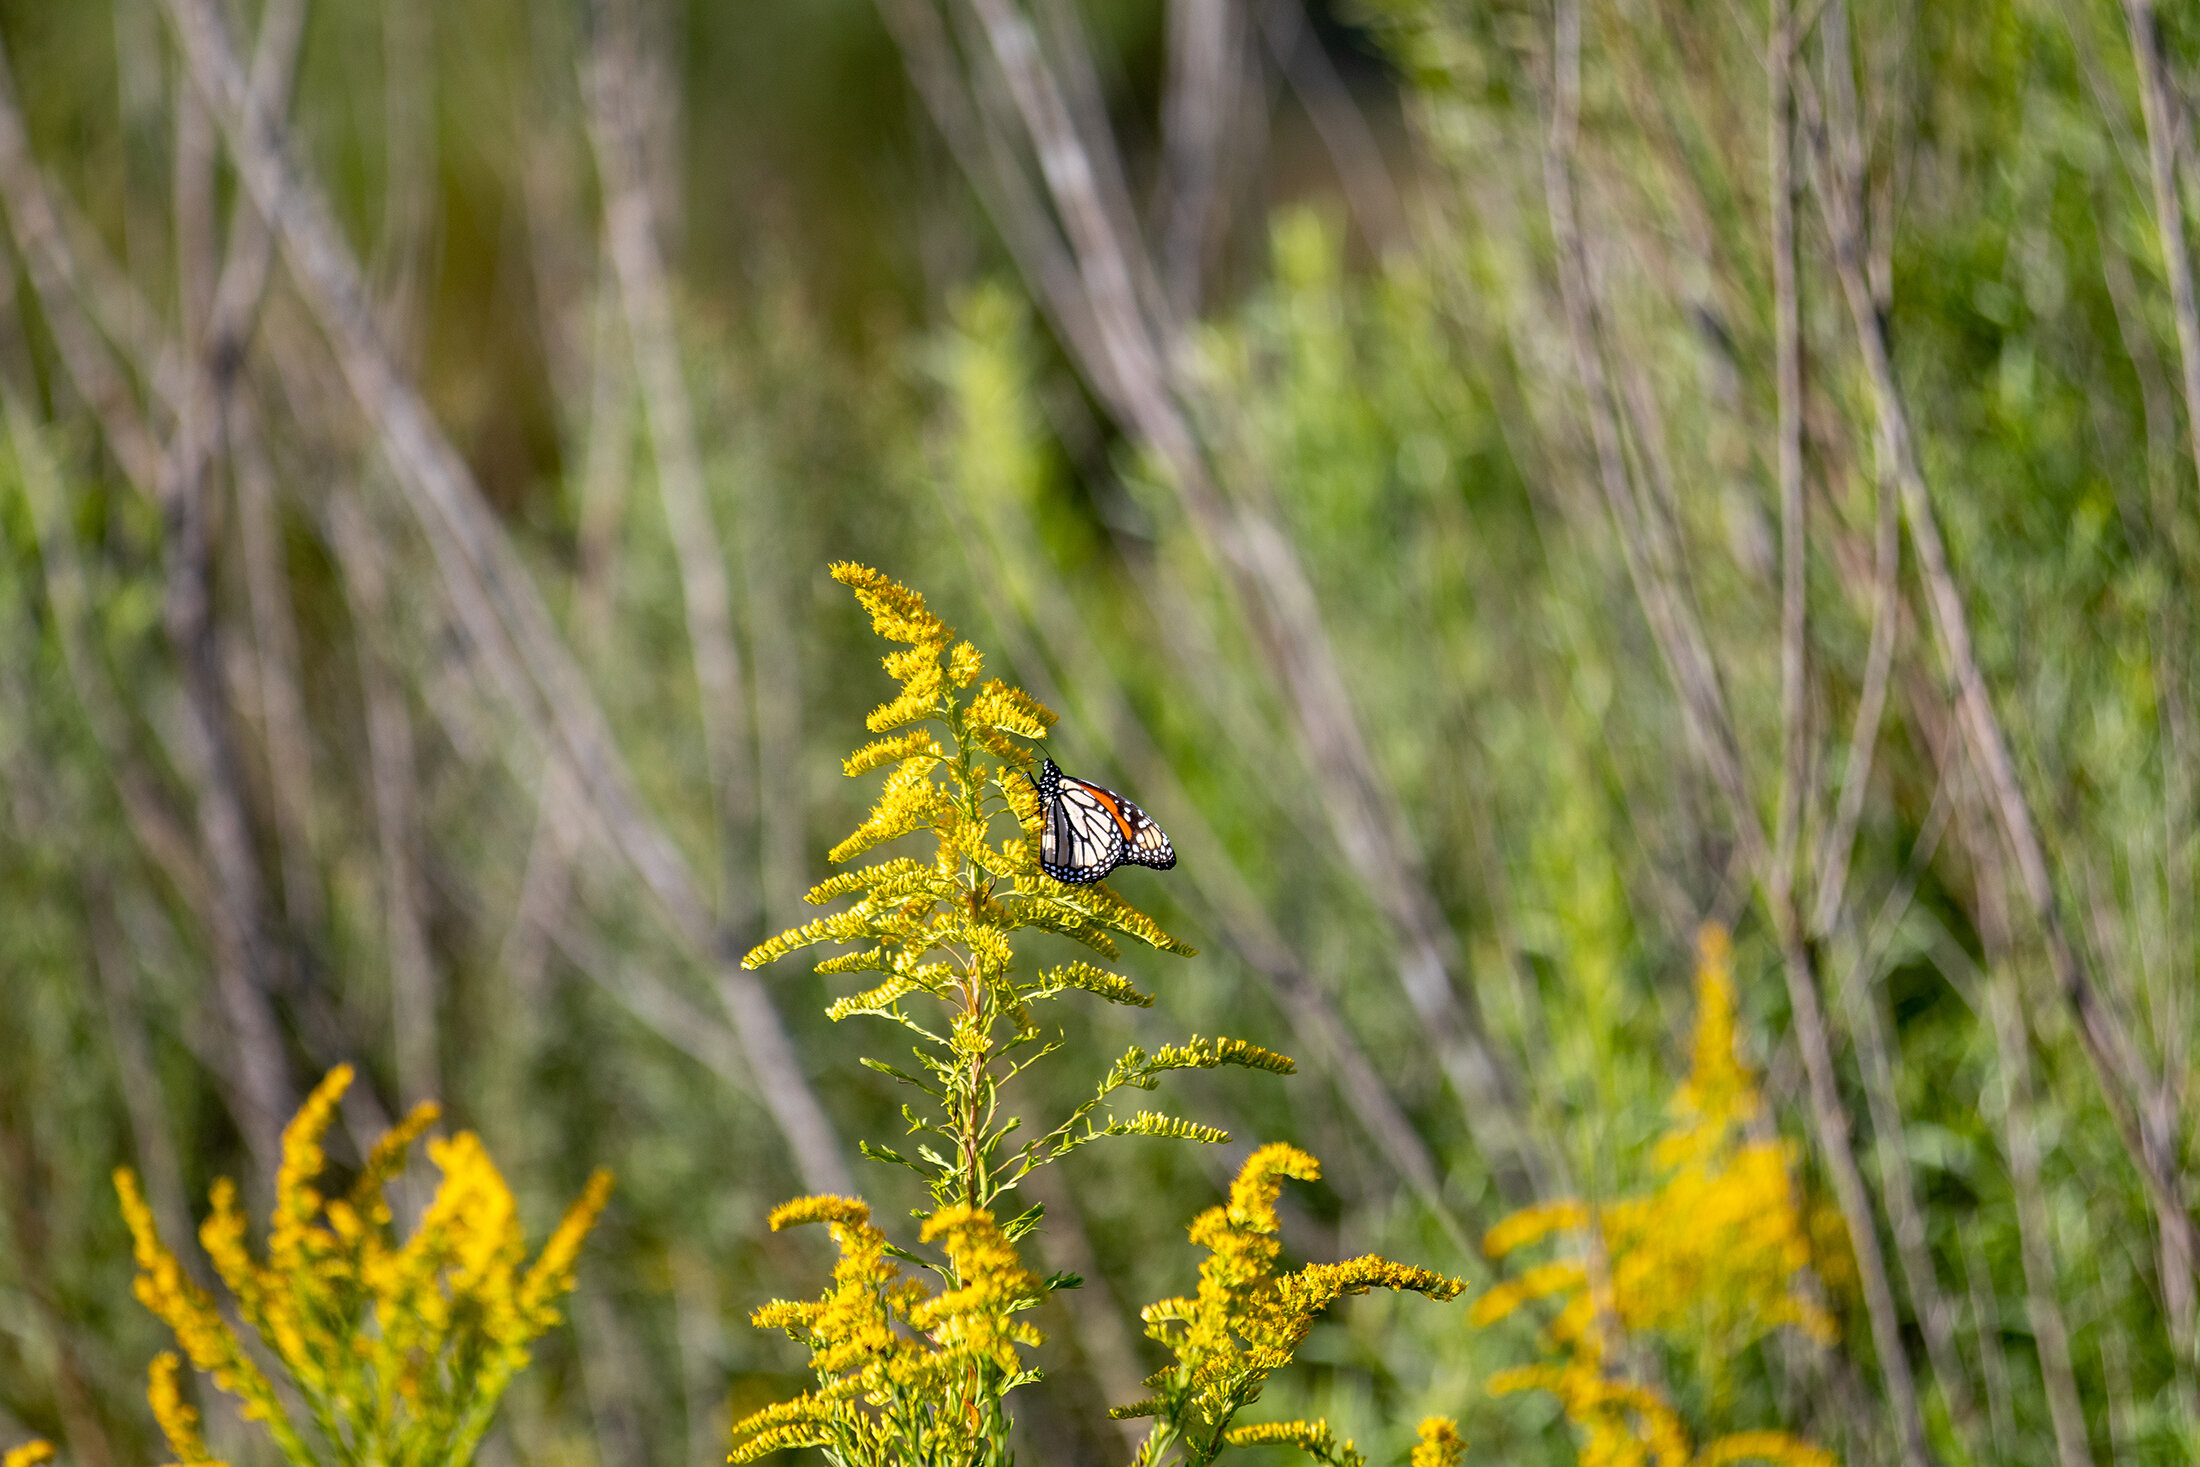 A migrating butterfly pollinates goldenrod blooms.